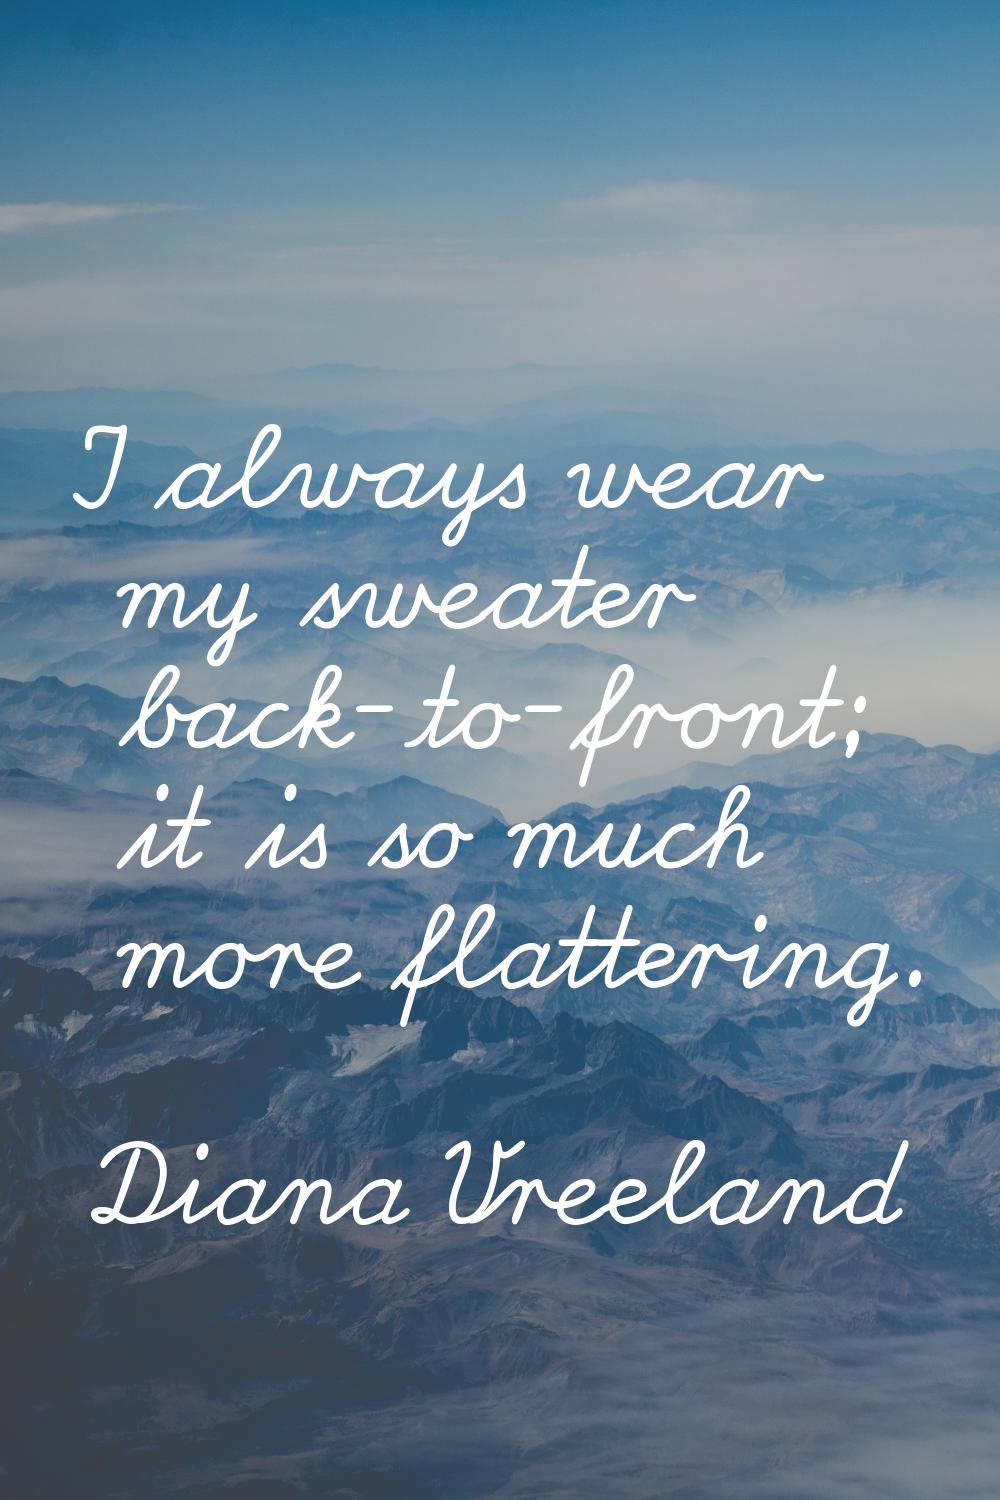 I always wear my sweater back-to-front; it is so much more flattering.